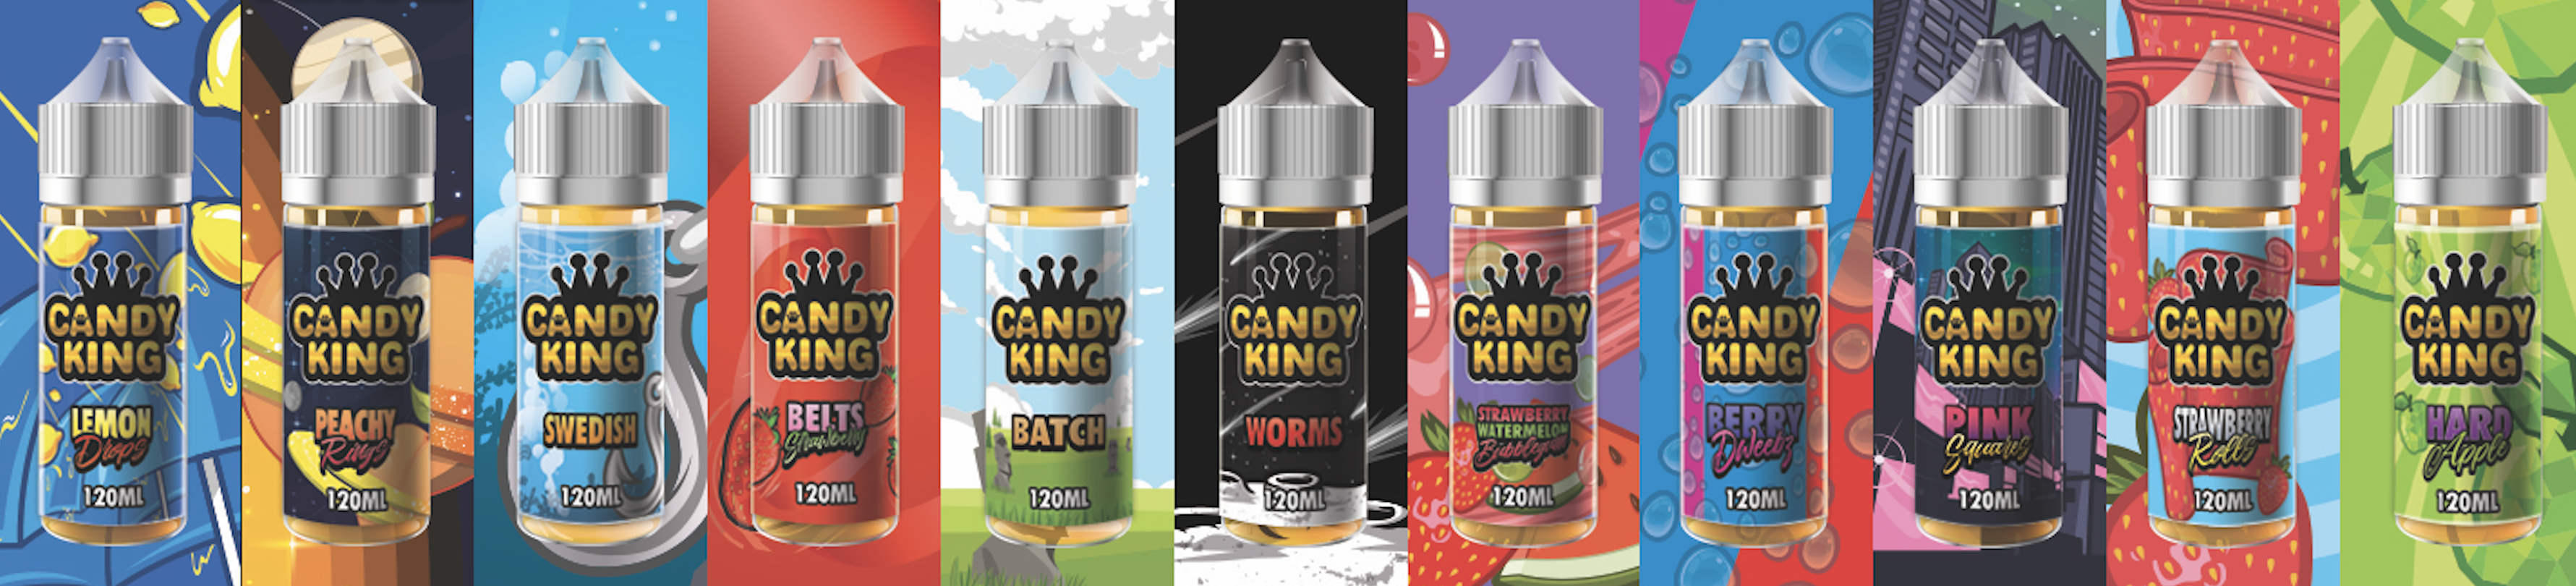 Candy King E-juice at the lowest cost